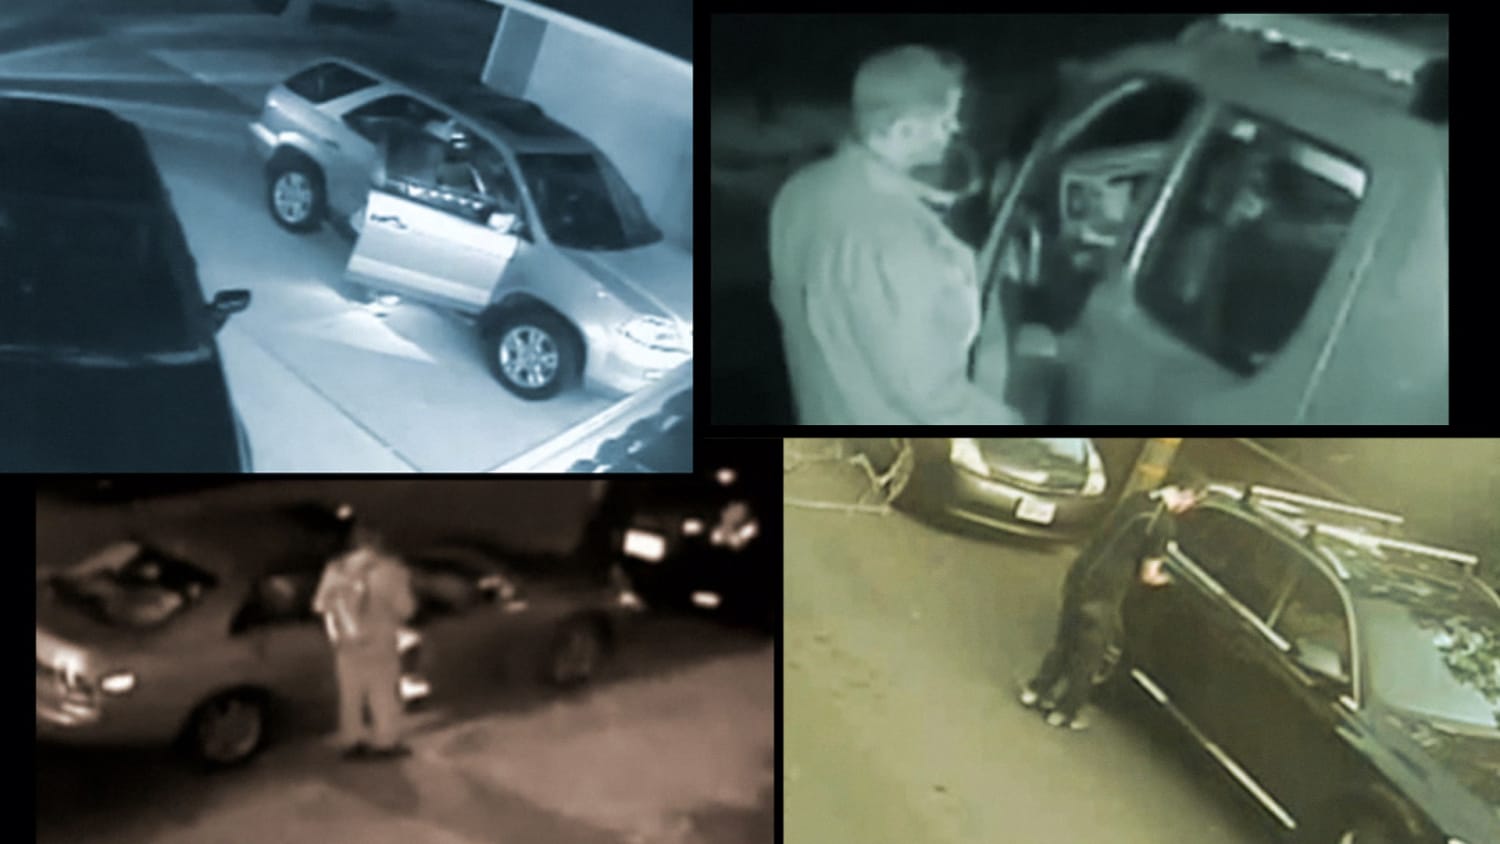 Mystery Device Could Let Thieves Get In Your Car in Seconds